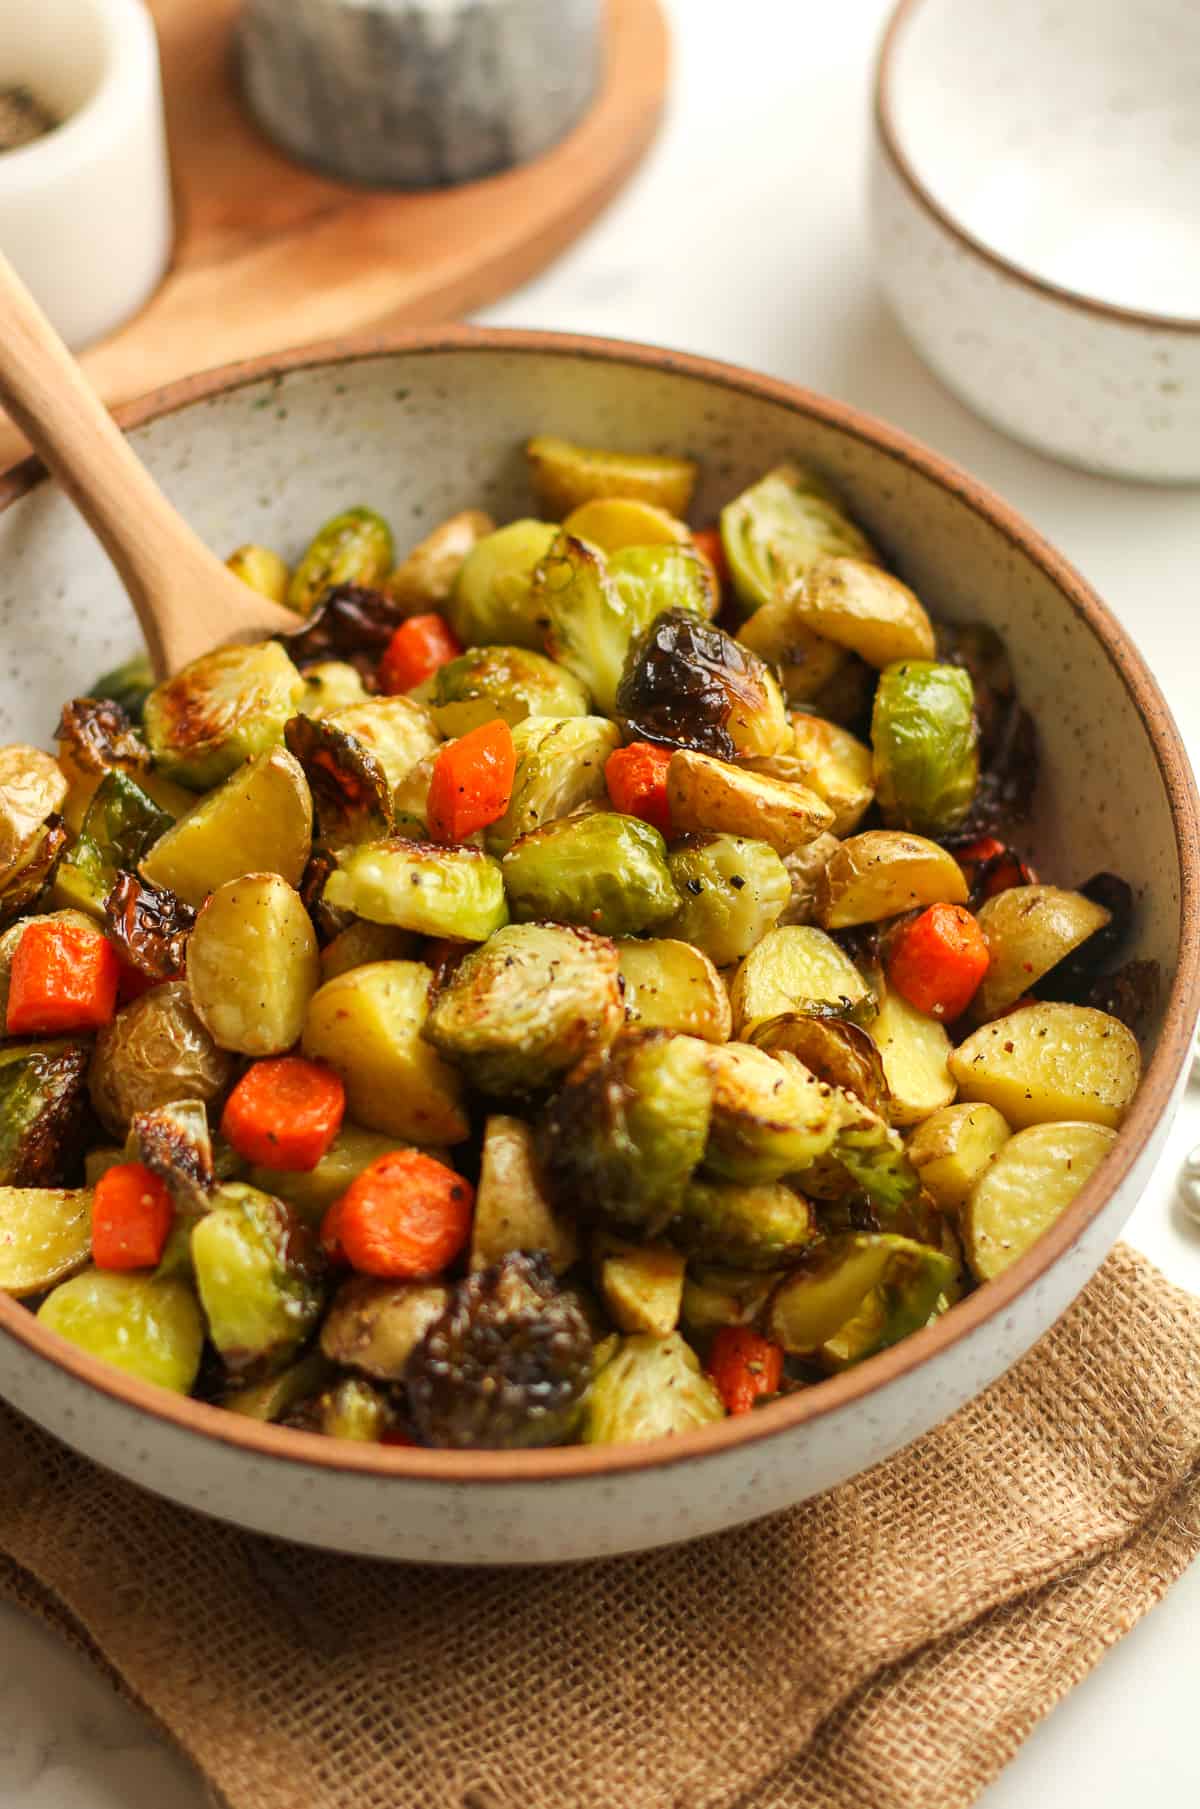 Side view of a bowl of roasted veggies, with a spoon.